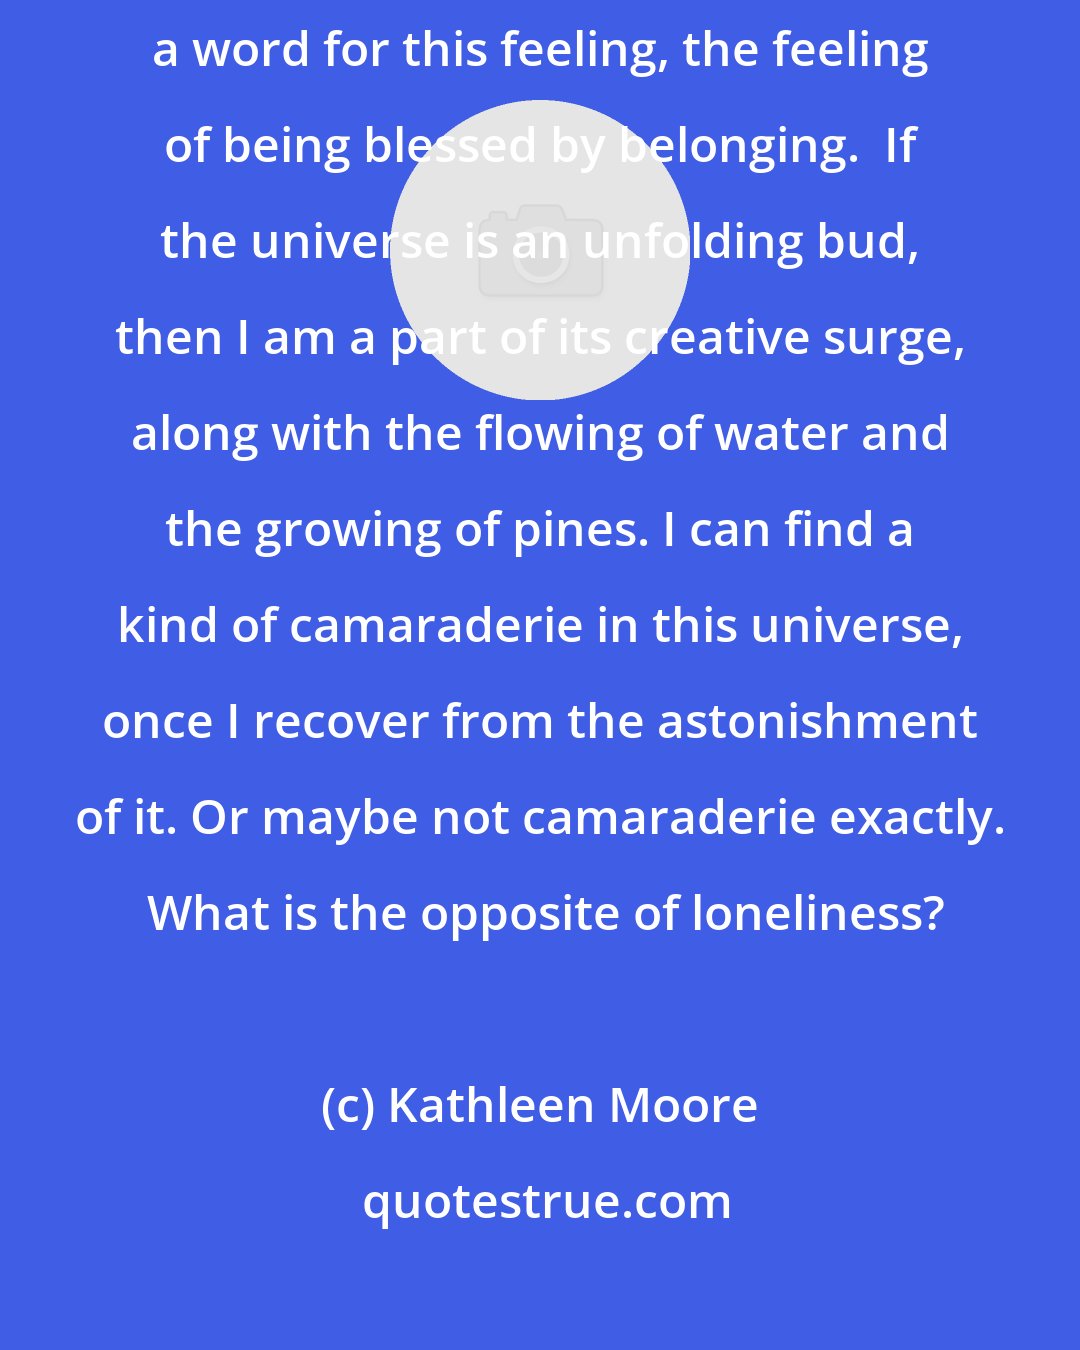 Kathleen Moore: For how smart we think we are, how facile with words, we don't have a word for this feeling, the feeling of being blessed by belonging.  If the universe is an unfolding bud, then I am a part of its creative surge, along with the flowing of water and the growing of pines. I can find a kind of camaraderie in this universe, once I recover from the astonishment of it. Or maybe not camaraderie exactly.  What is the opposite of loneliness?